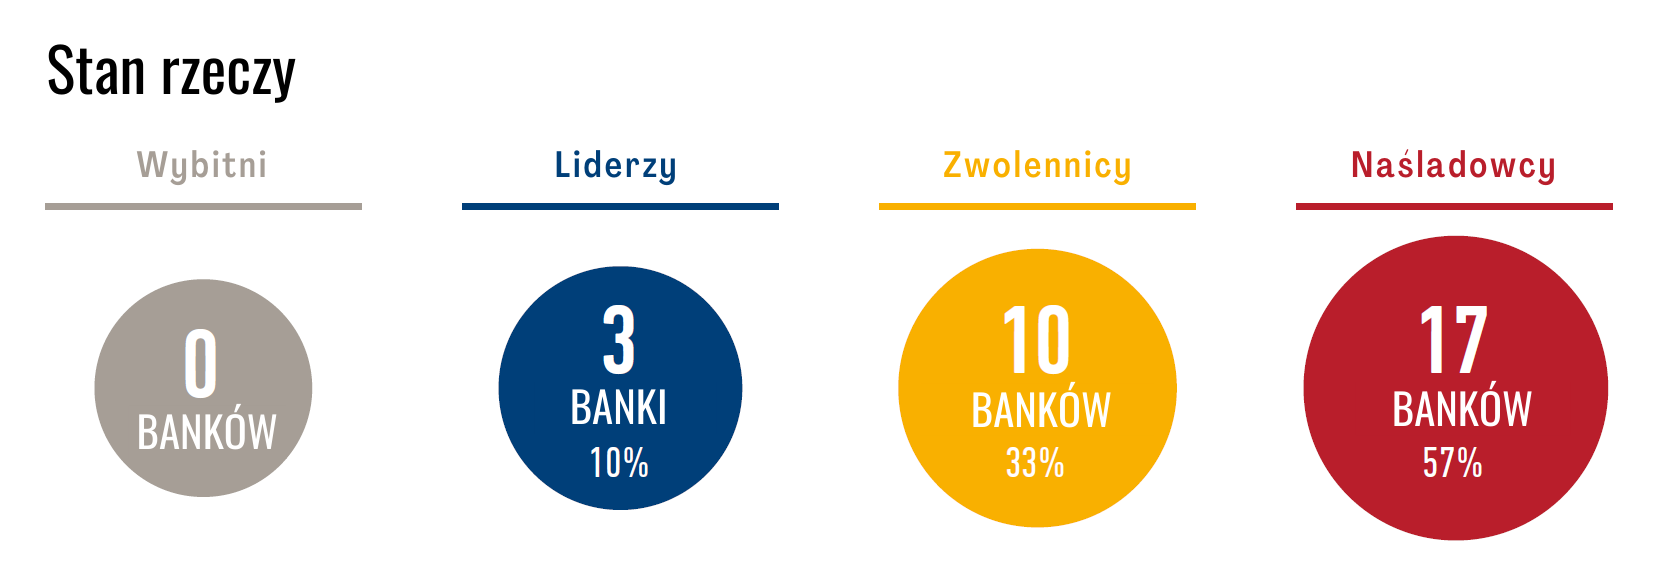 Responsible banking practices_webpage visual_PL.png